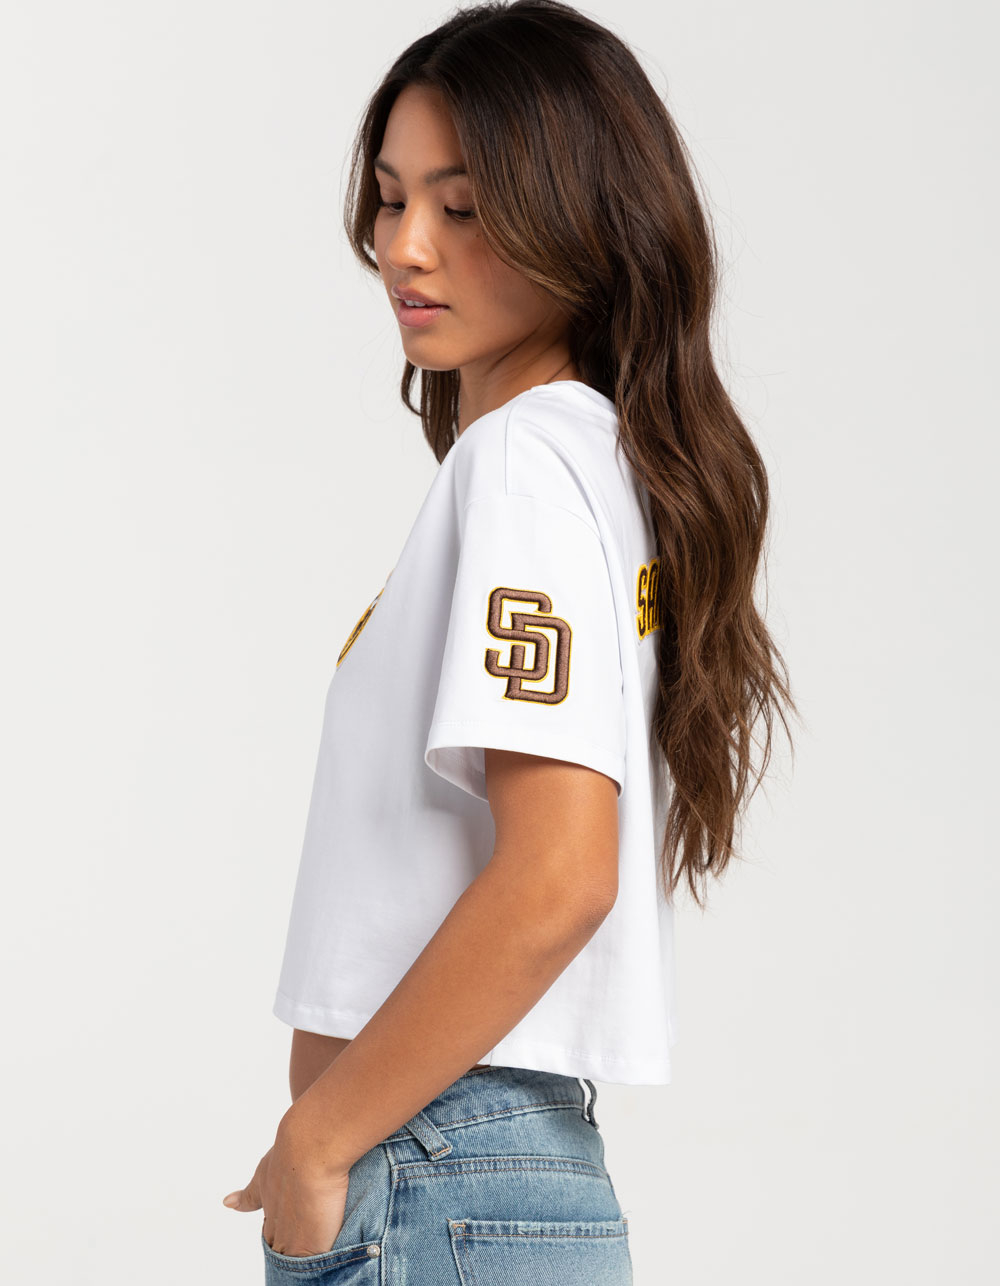 Lids San Diego Padres The Wild Collective Women's Cropped T-Shirt - Black